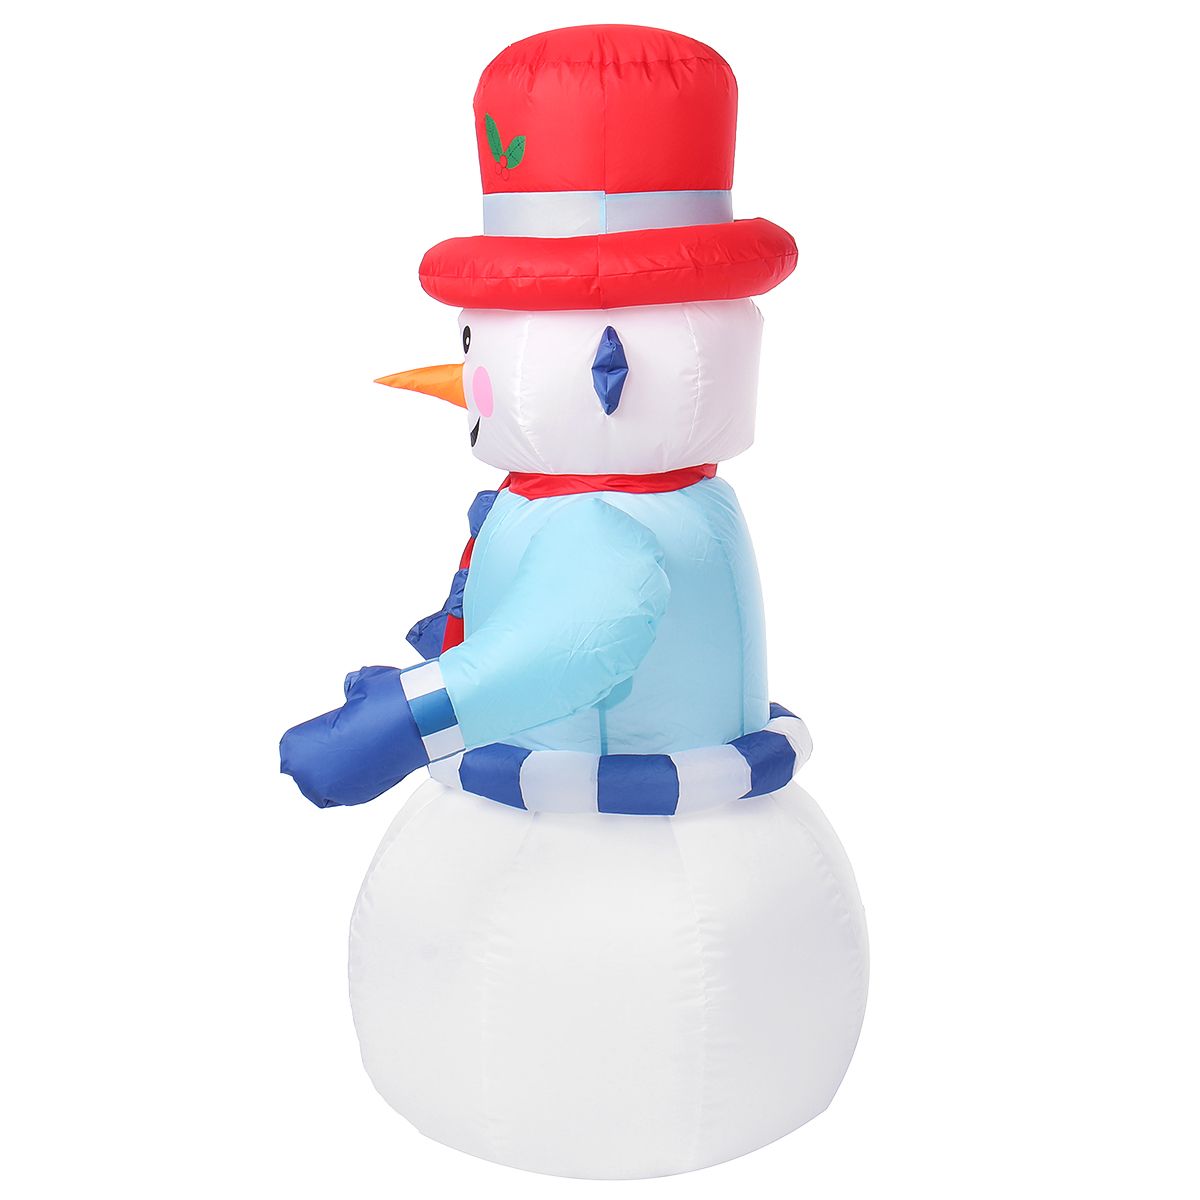 8FT-LED-Christmas-Inflatable-Snowman-Halloween-Outdoors-Ornaments-Shop-Decoration-1785588